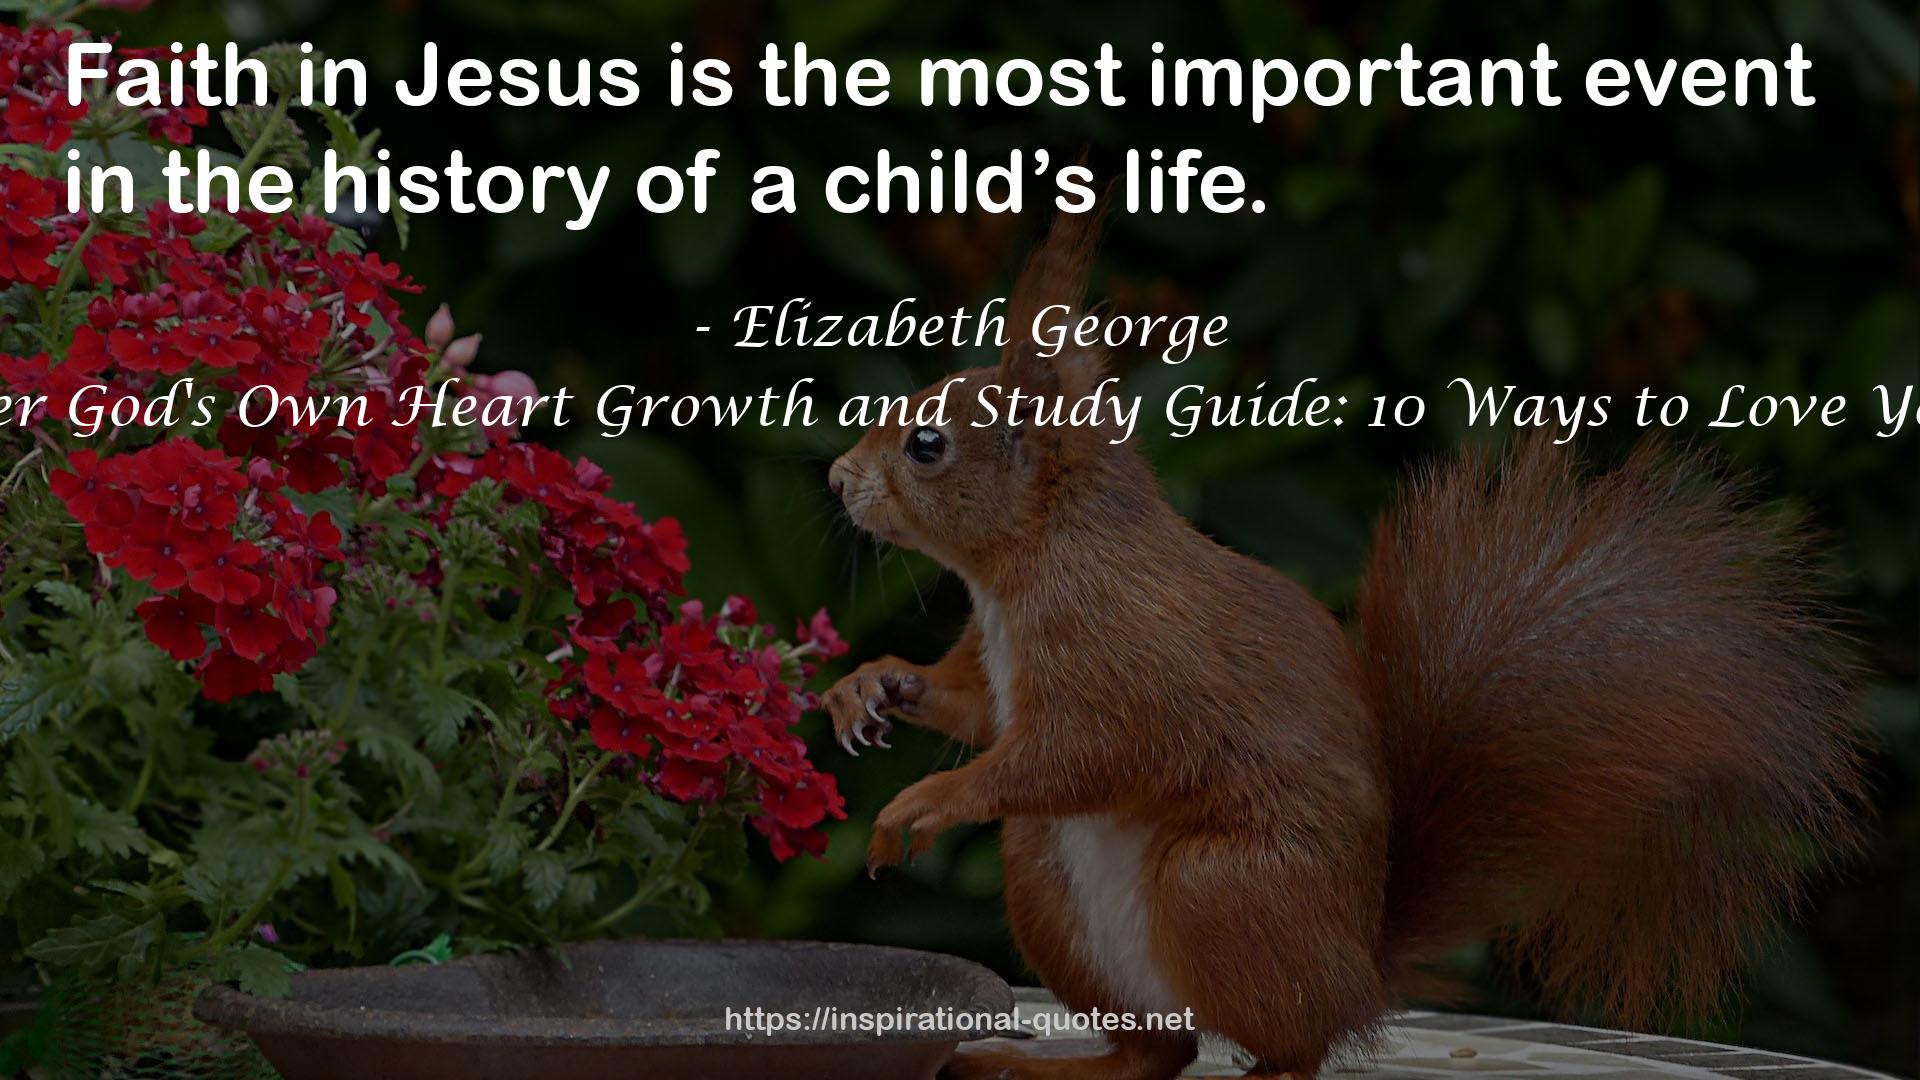 A Mom After God's Own Heart Growth and Study Guide: 10 Ways to Love Your Children QUOTES